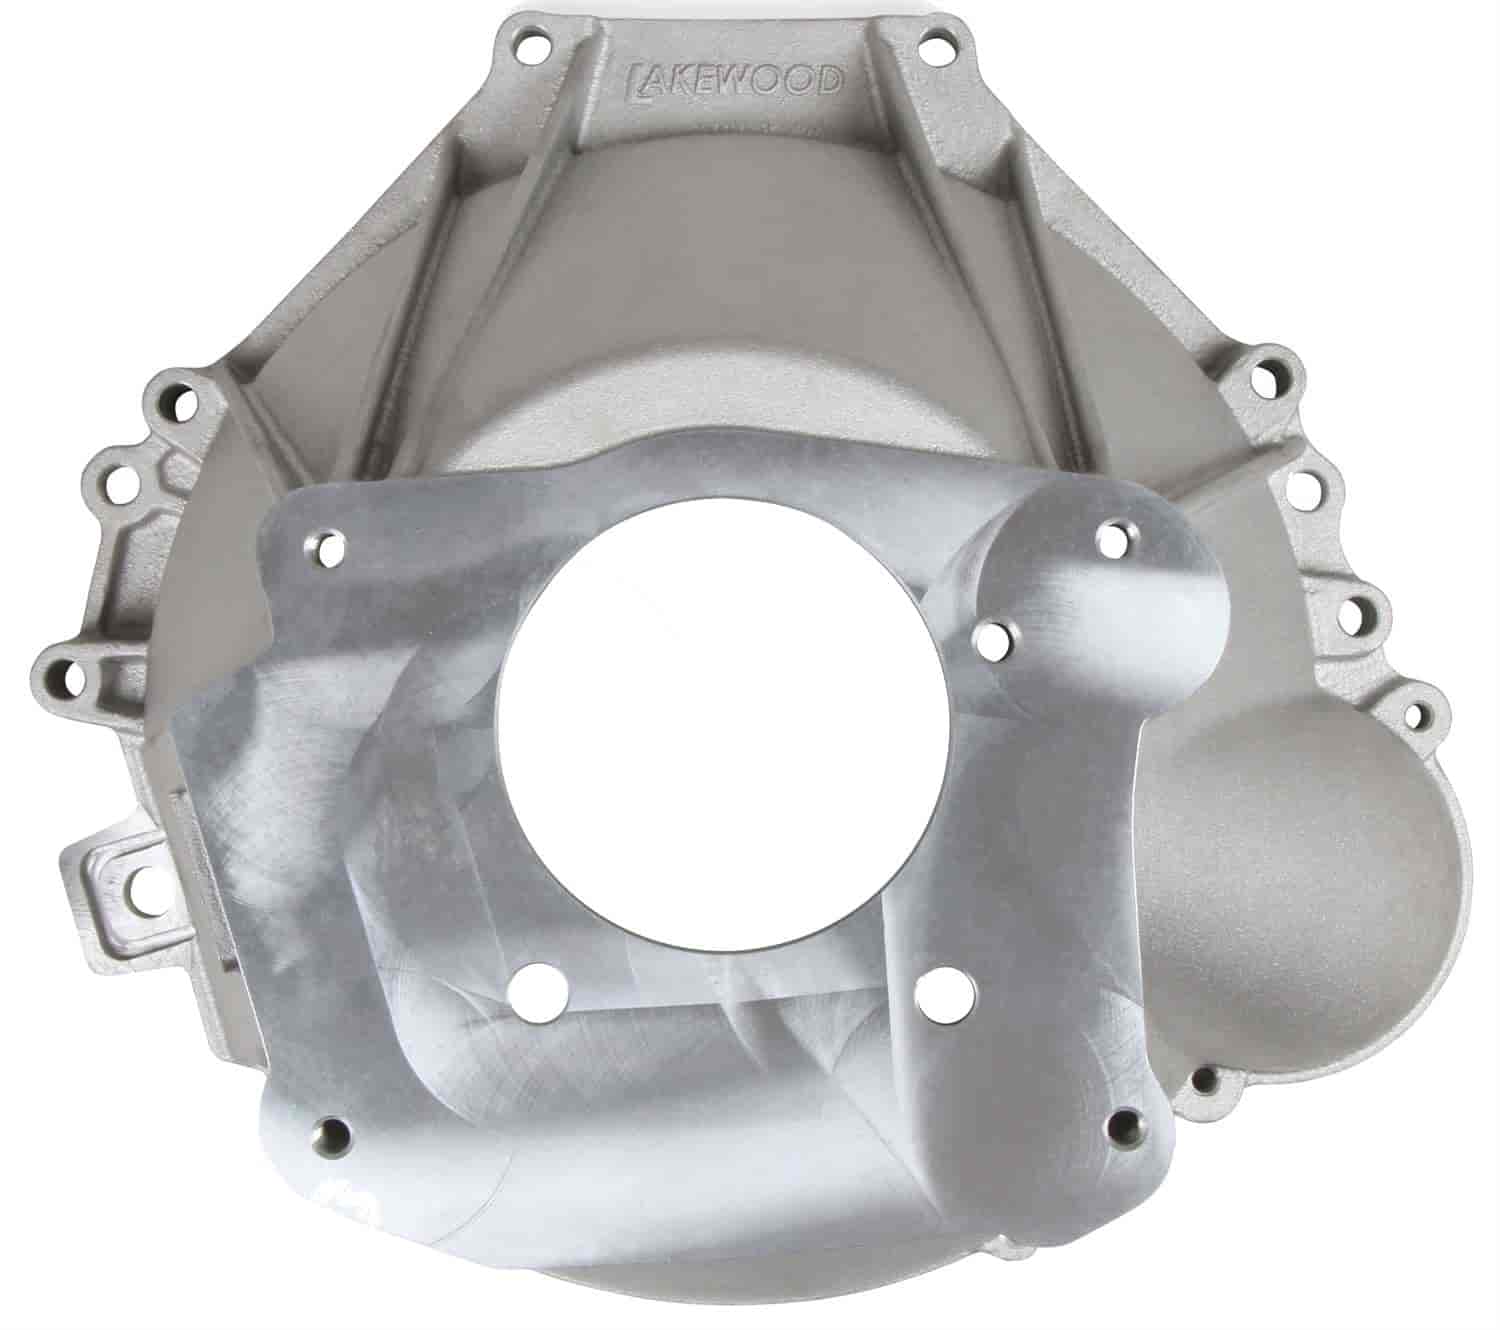 Cast-Aluminum Bellhousing for Small Block Ford Engine to